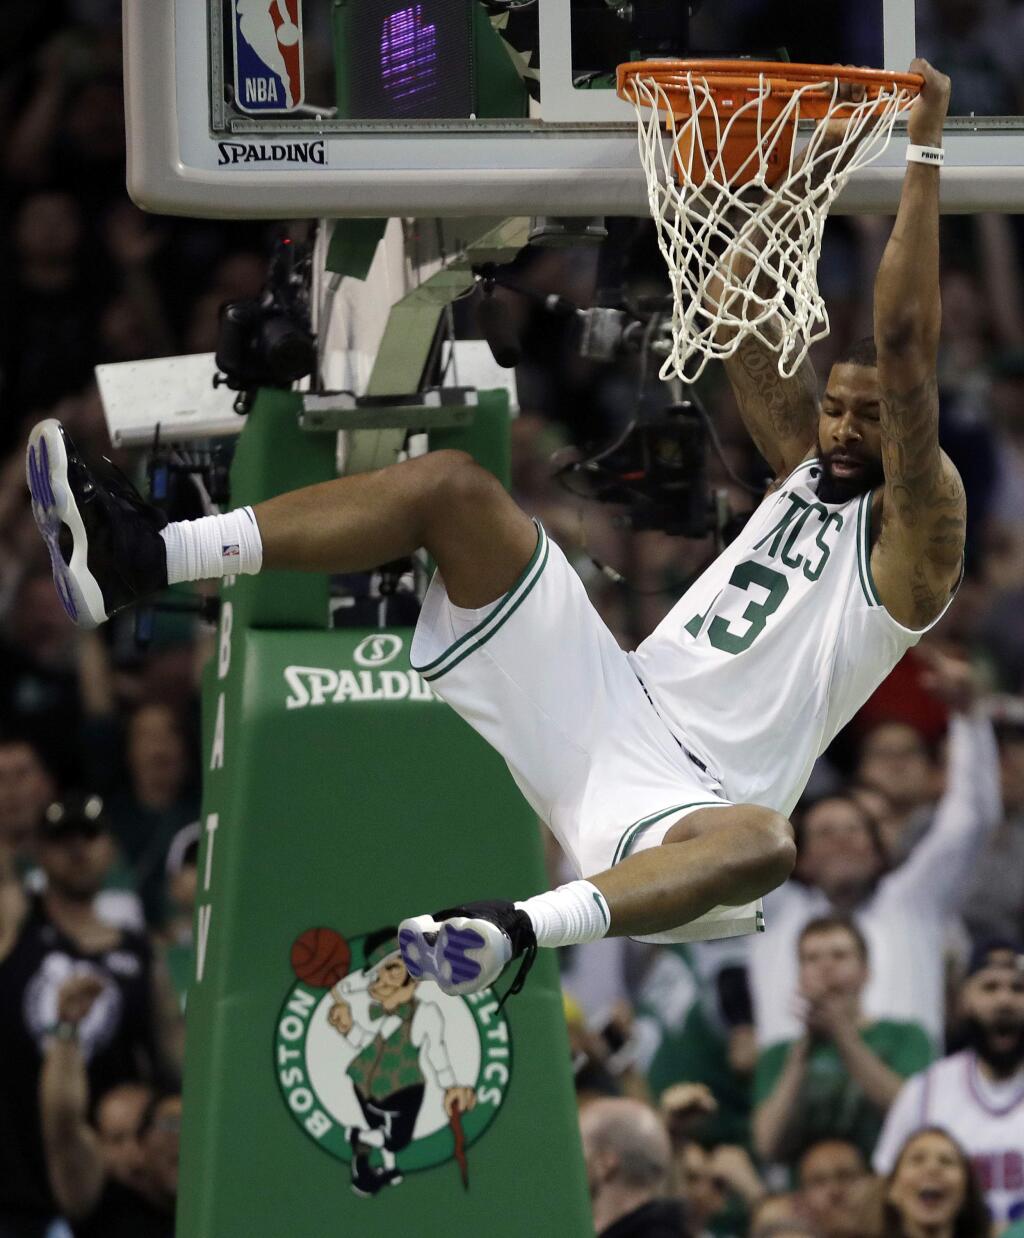 Boston Celtics forward Marcus Morris hangs from the rim after dunking against the Cleveland Cavaliers during the first half in Game 2 of the NBA Eastern Conference final Tuesday, May 15, 2018, in Boston. (AP Photo/Charles Krupa)